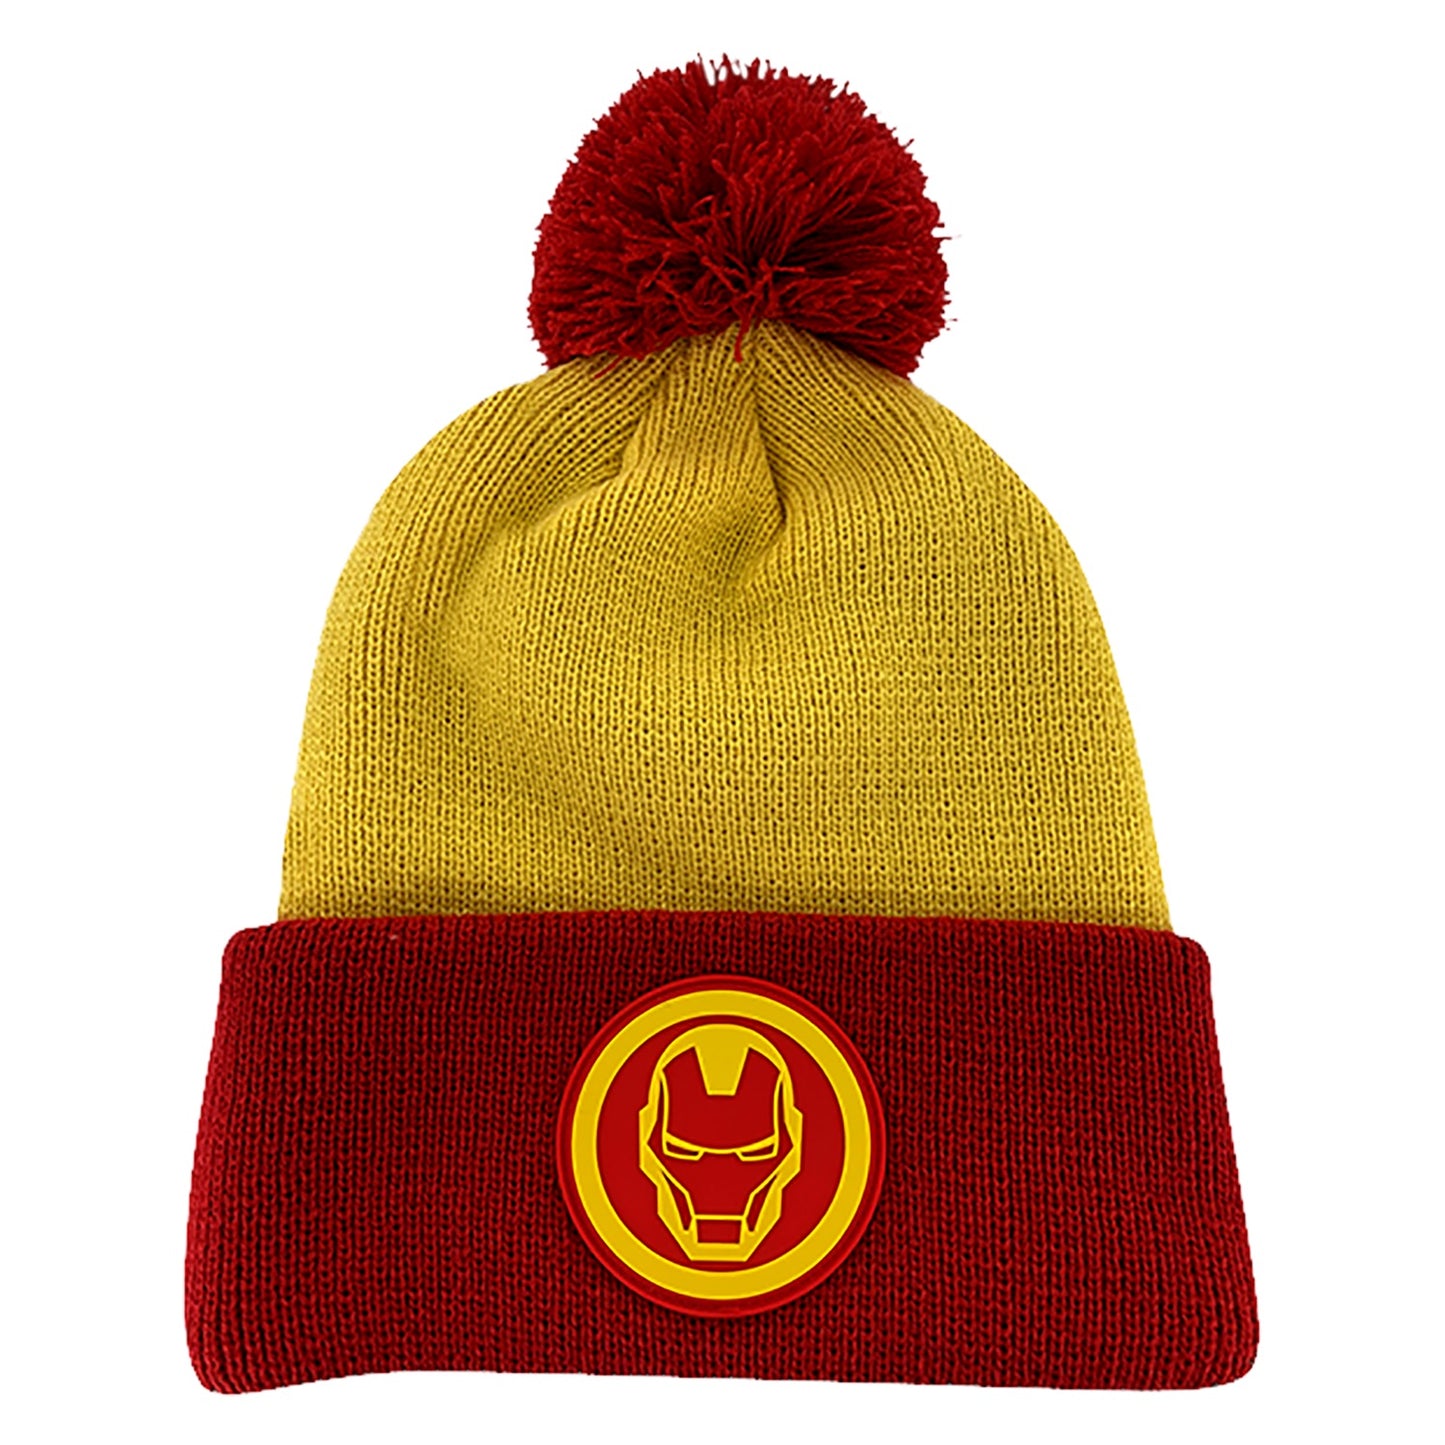 Red and Yellow Iron Man Beanie Hat